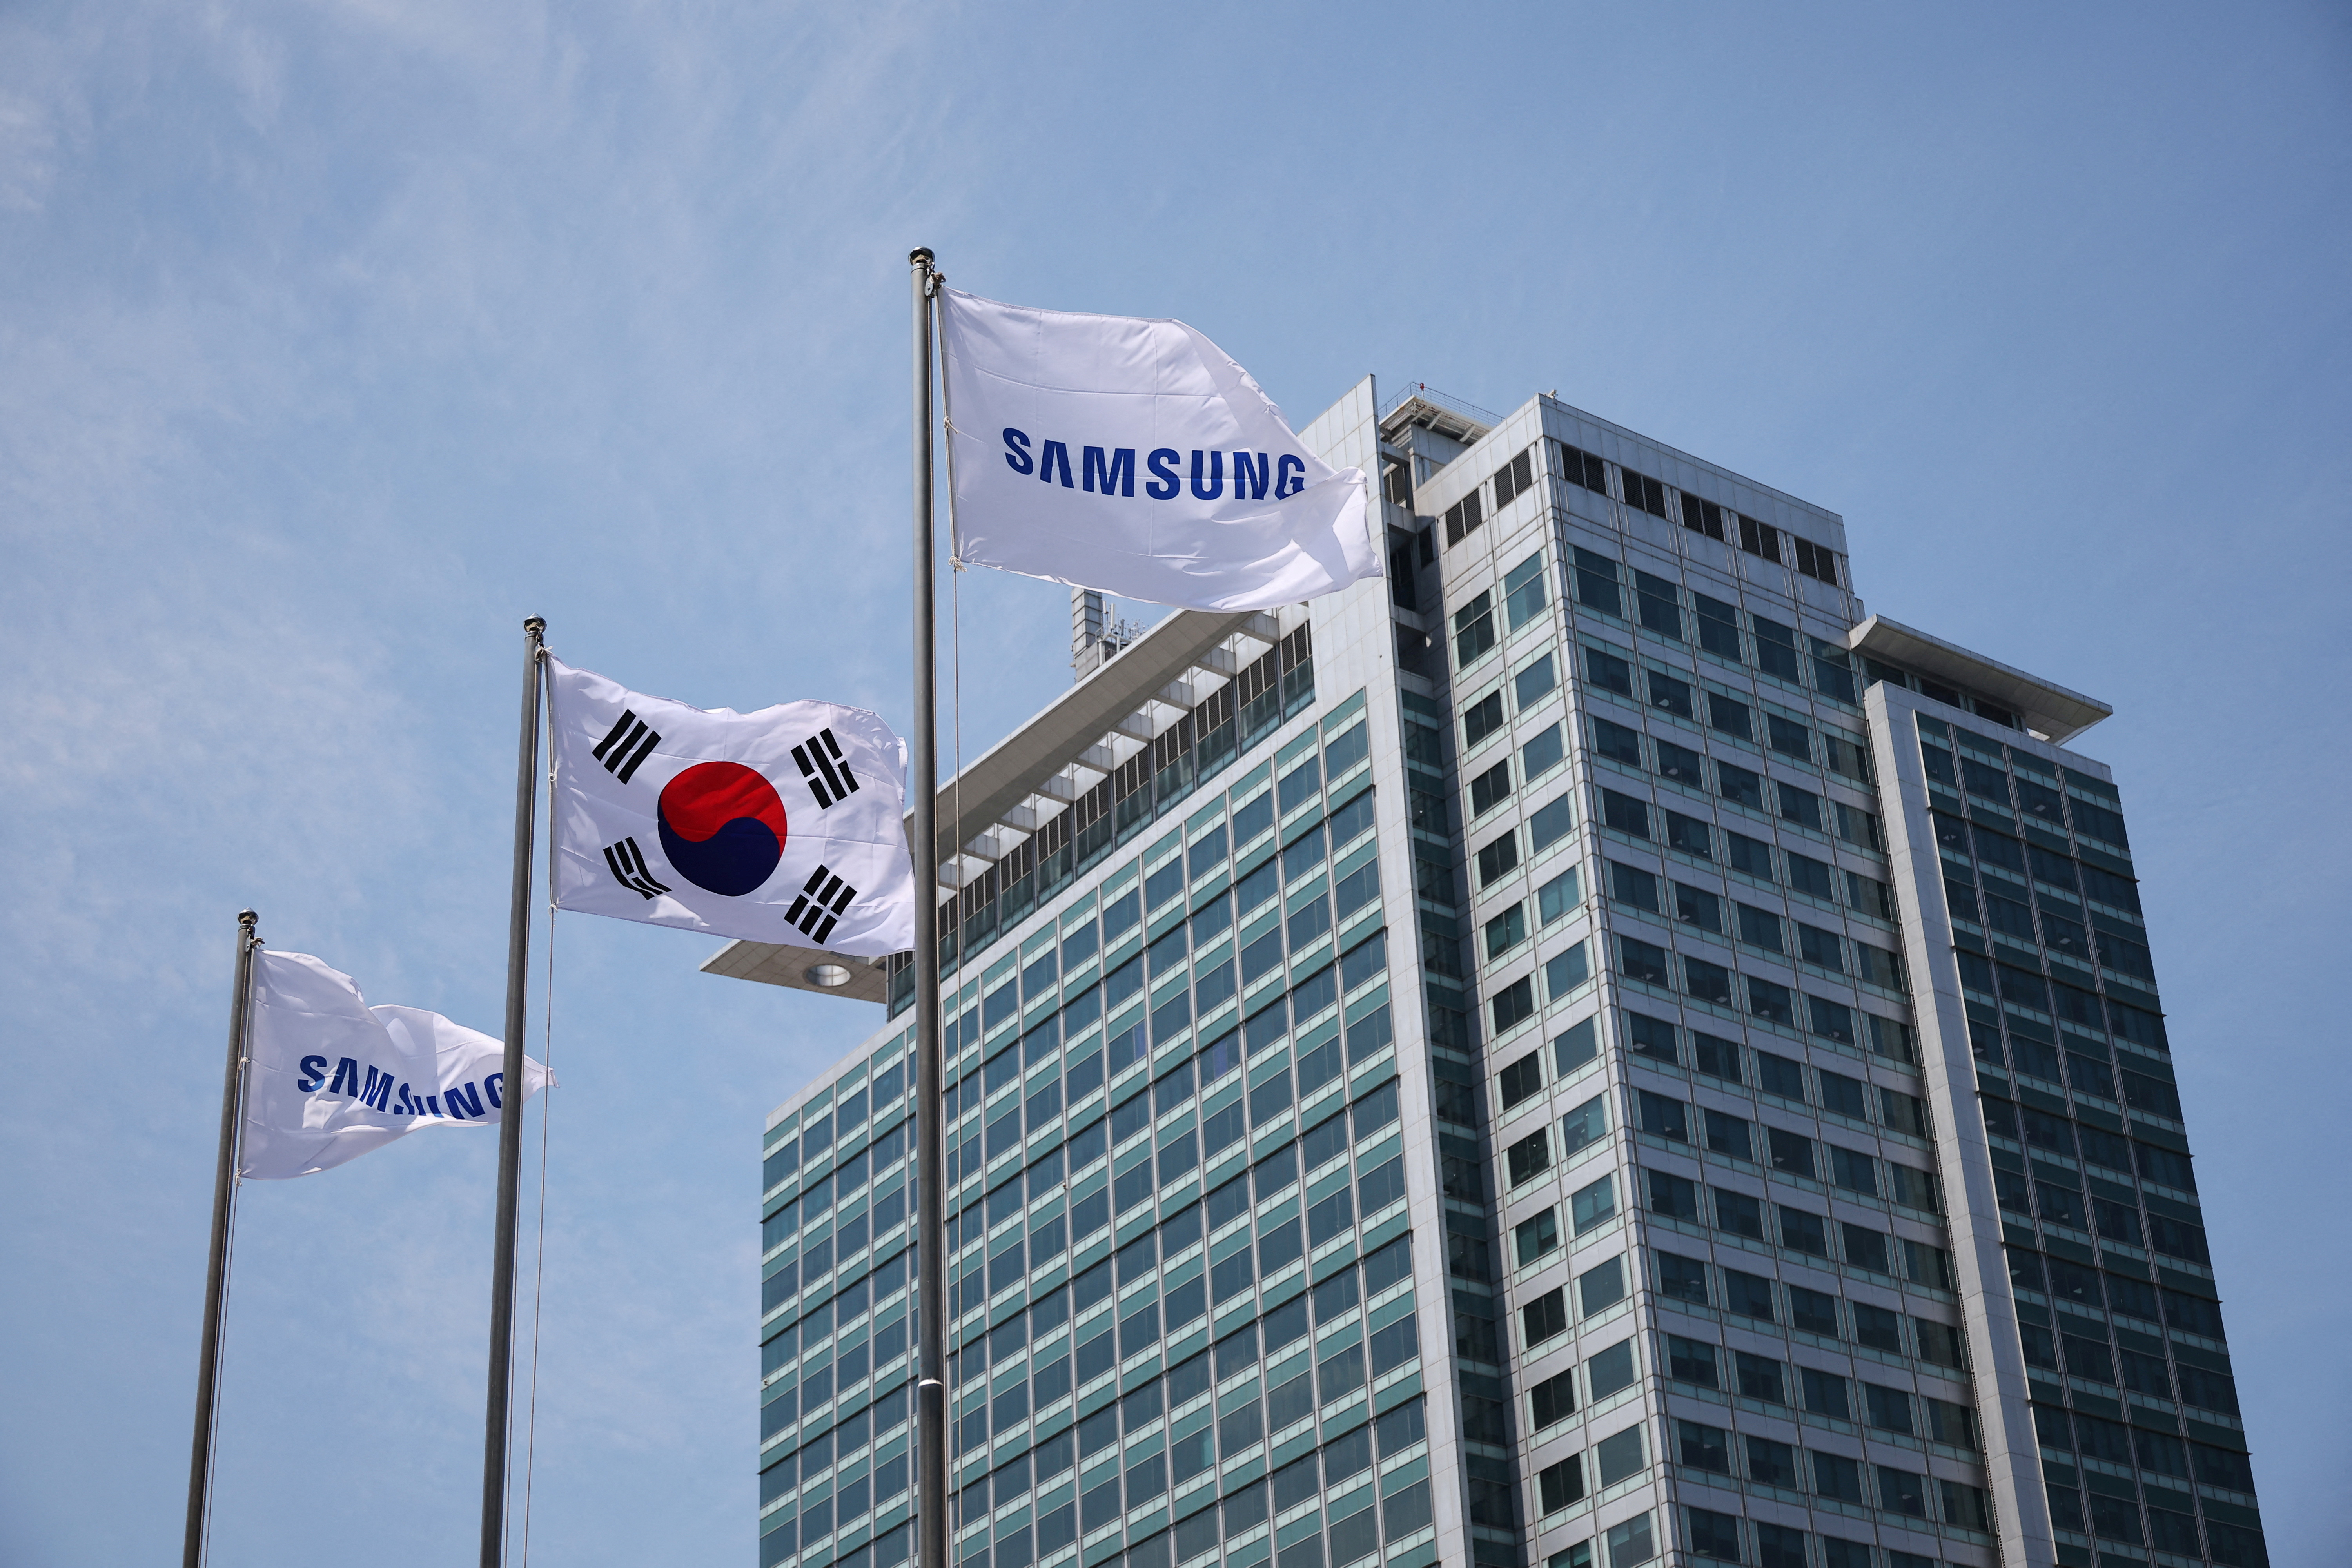 Media tour to Samsung Electronic' HQ in Suwon